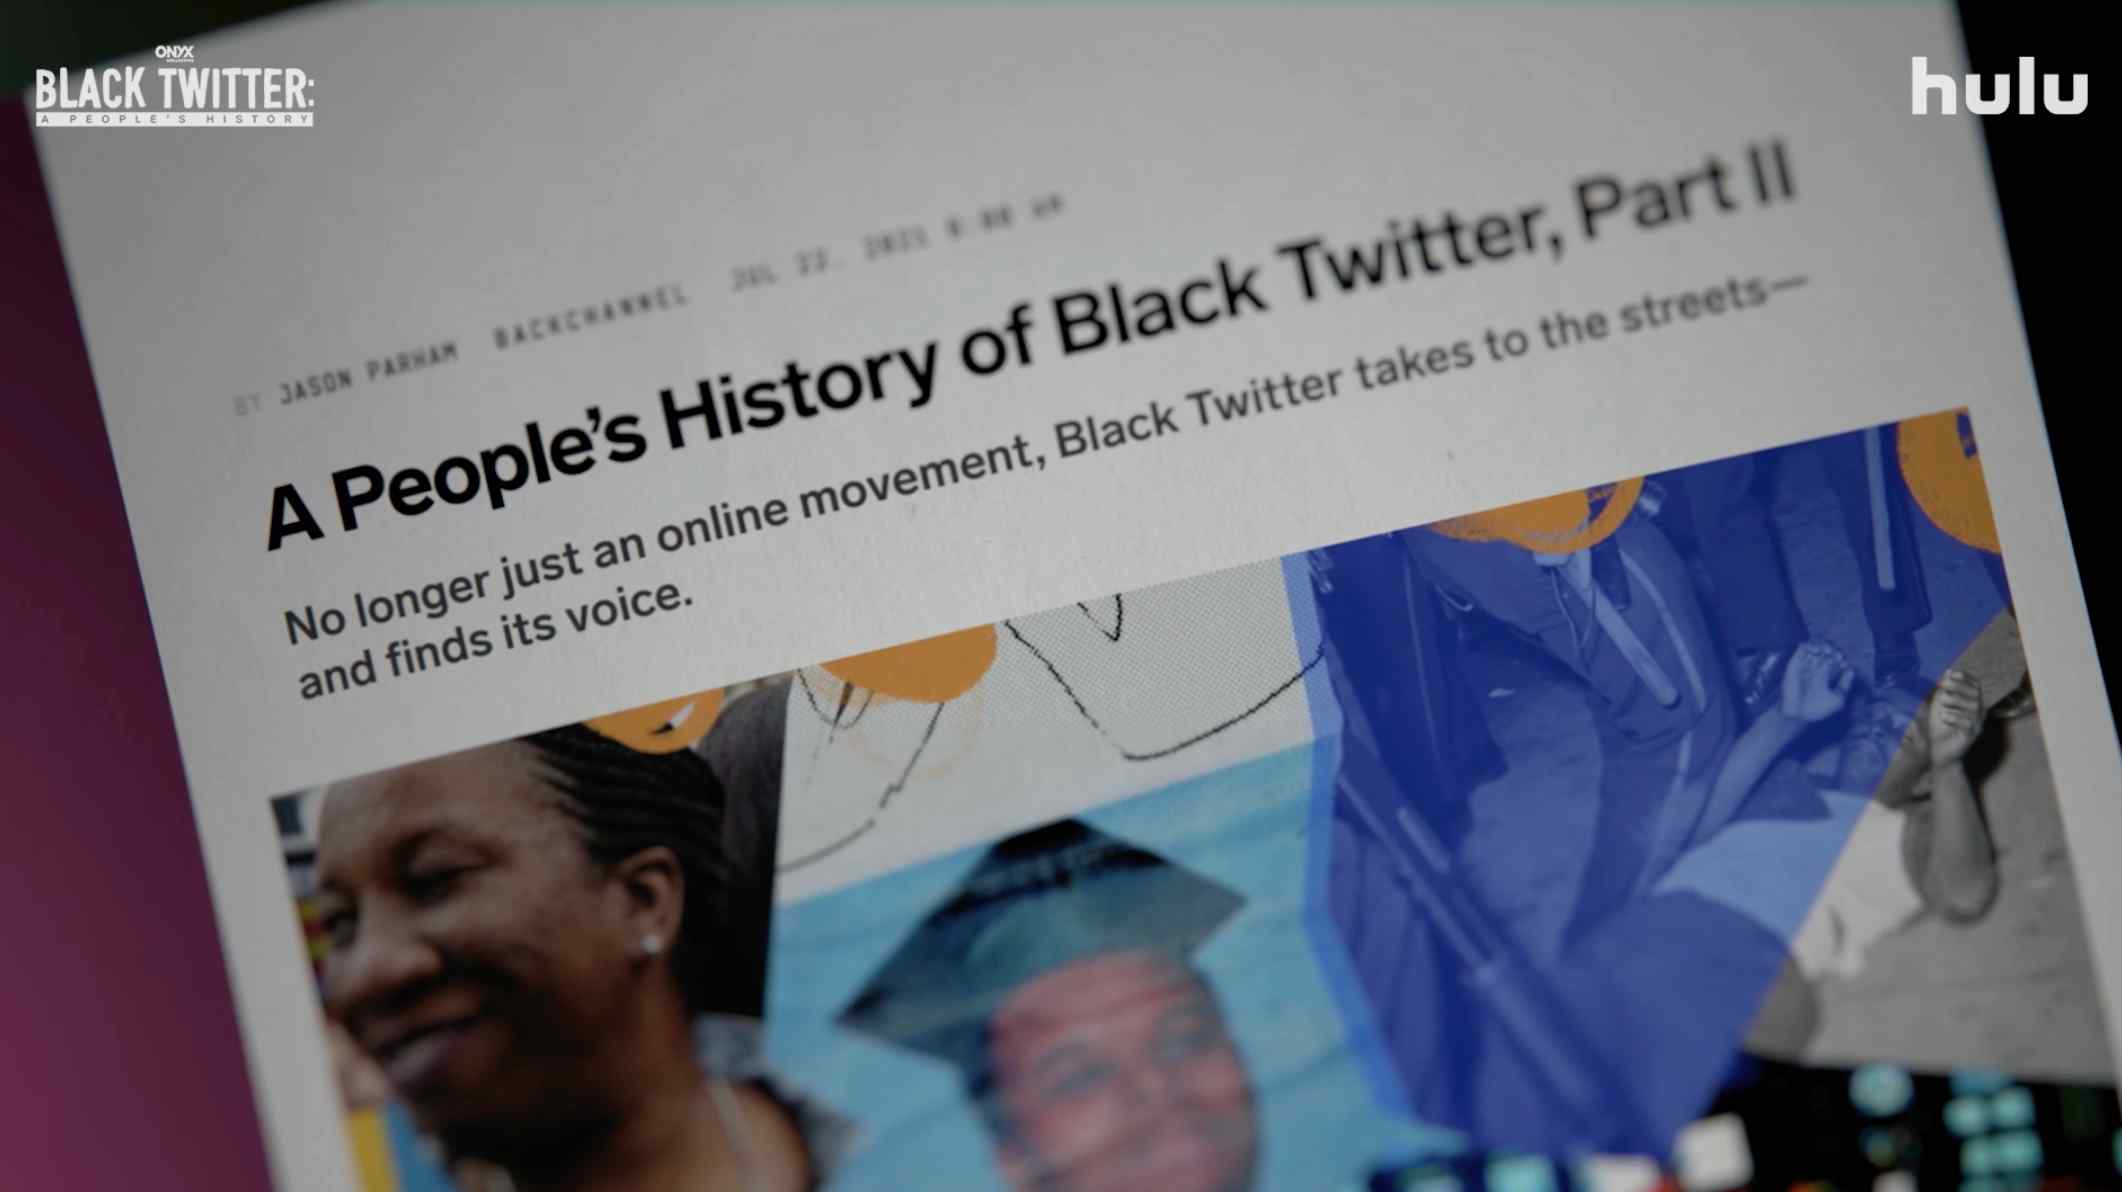 'Black Twitter: A People's History' Exclusive Highlights The Article Behind The New Hulu Docuseries